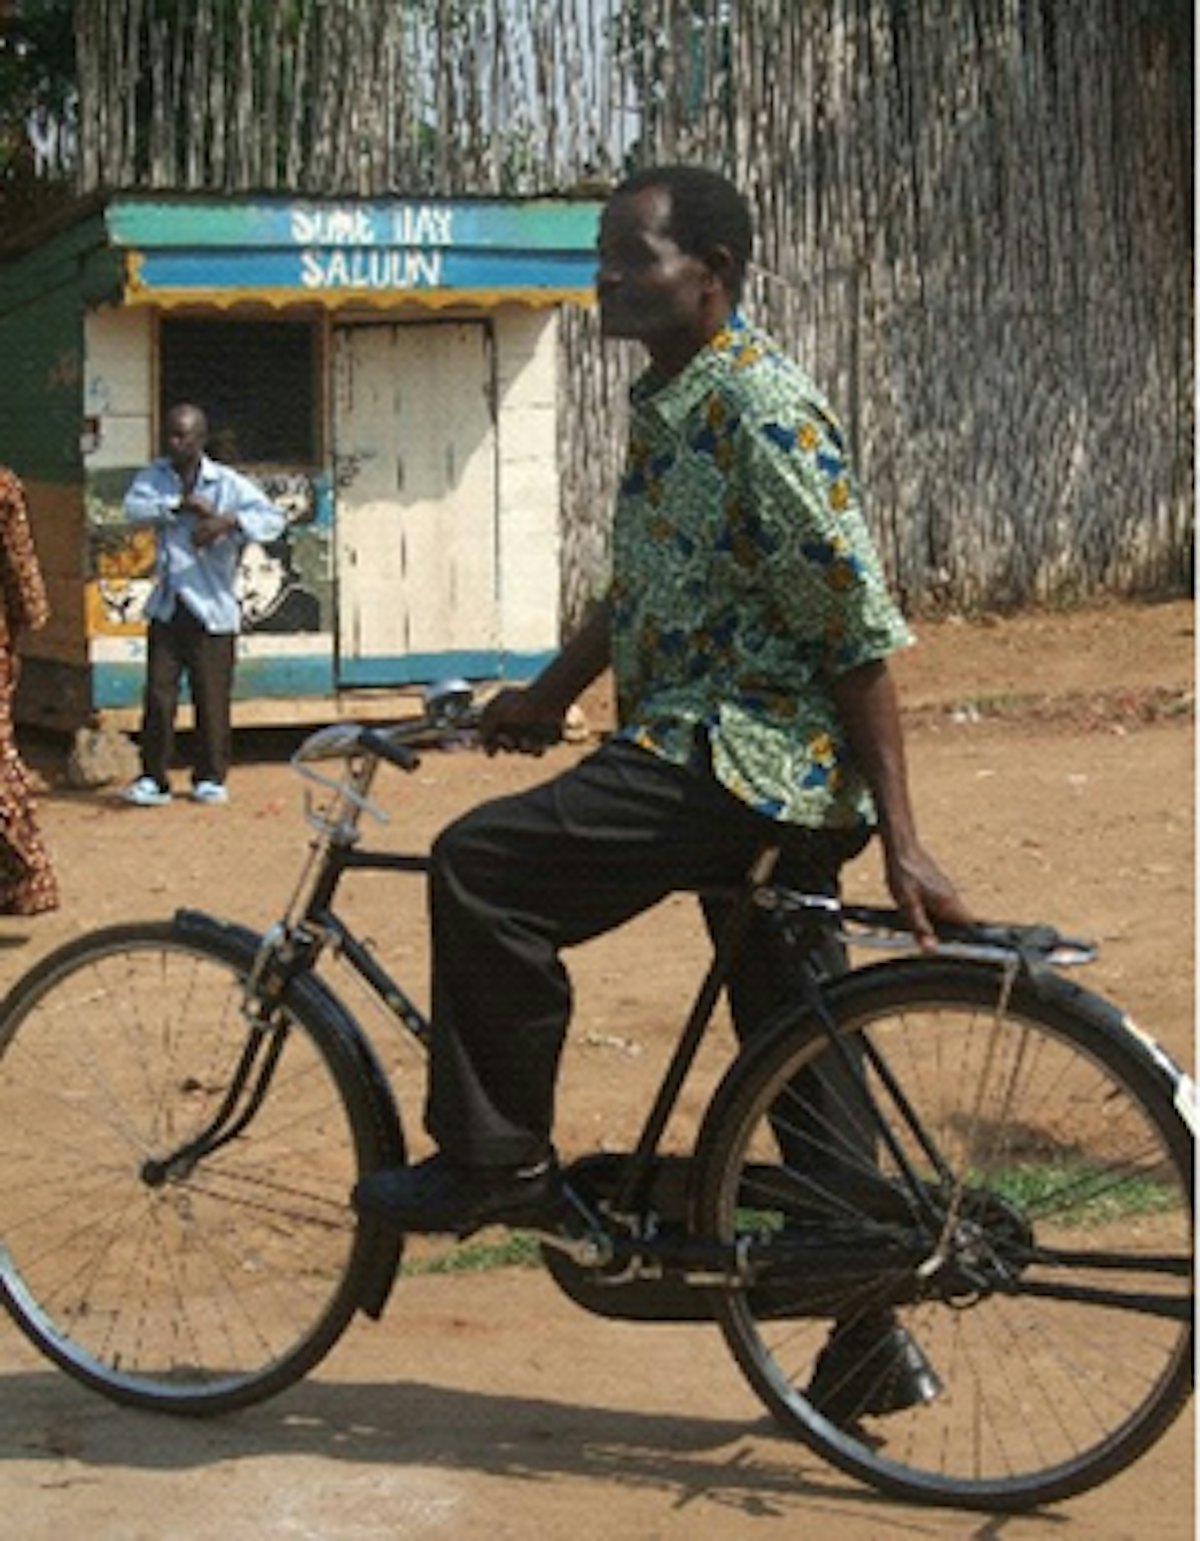 Hizzaya Hissani, UPLIFT program director, uses a bicycle to travel from village to village to monitor the program and consult with participants.